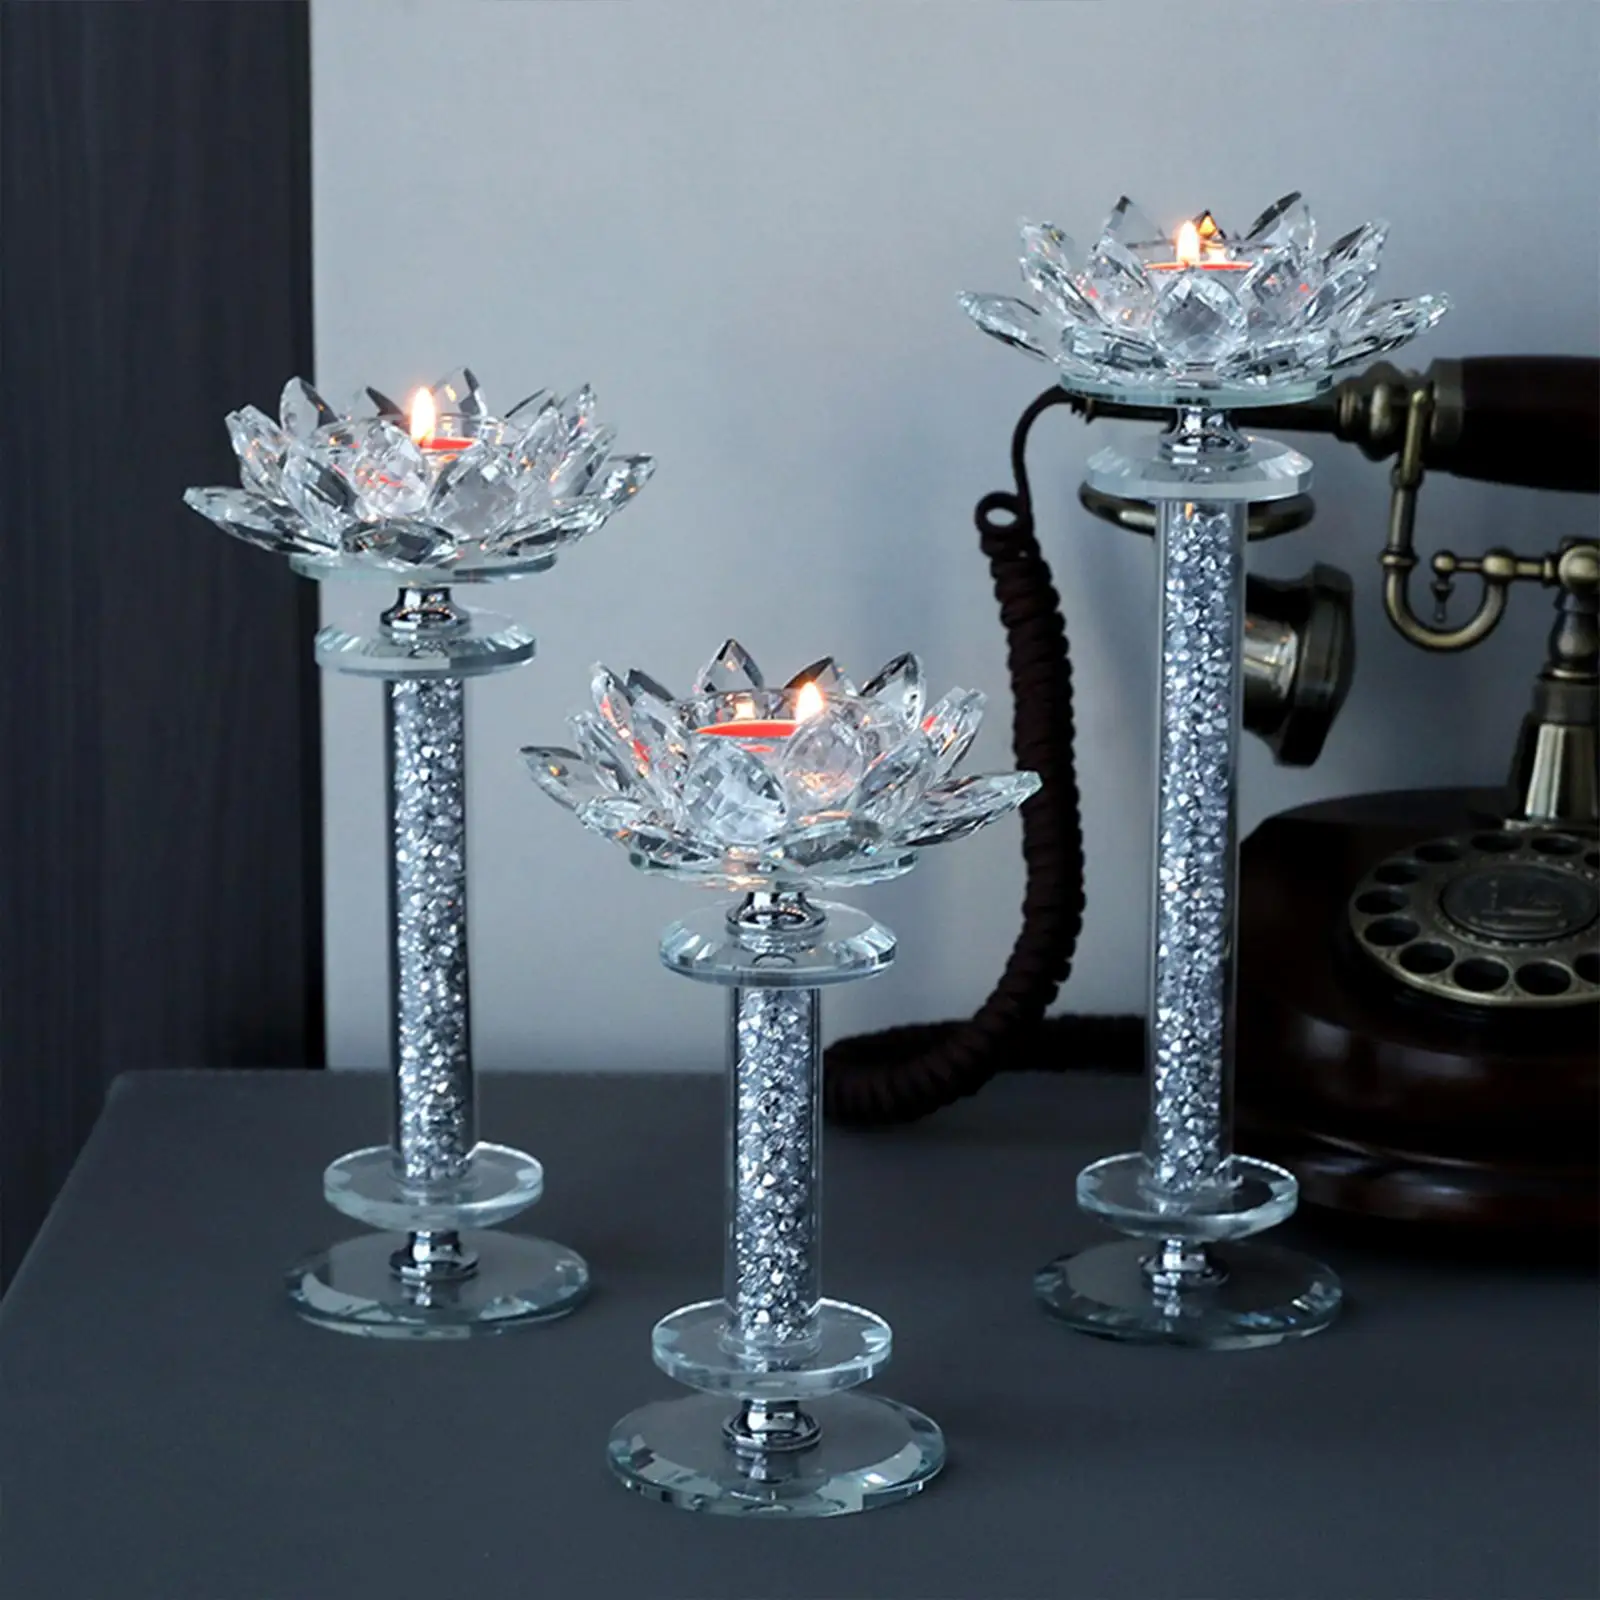 3 Pieces Clear Glass Lotus Flower Candle Holder Pillar Candlestick Romantic Tea Light Holders for Tabletop Dining Room Decor